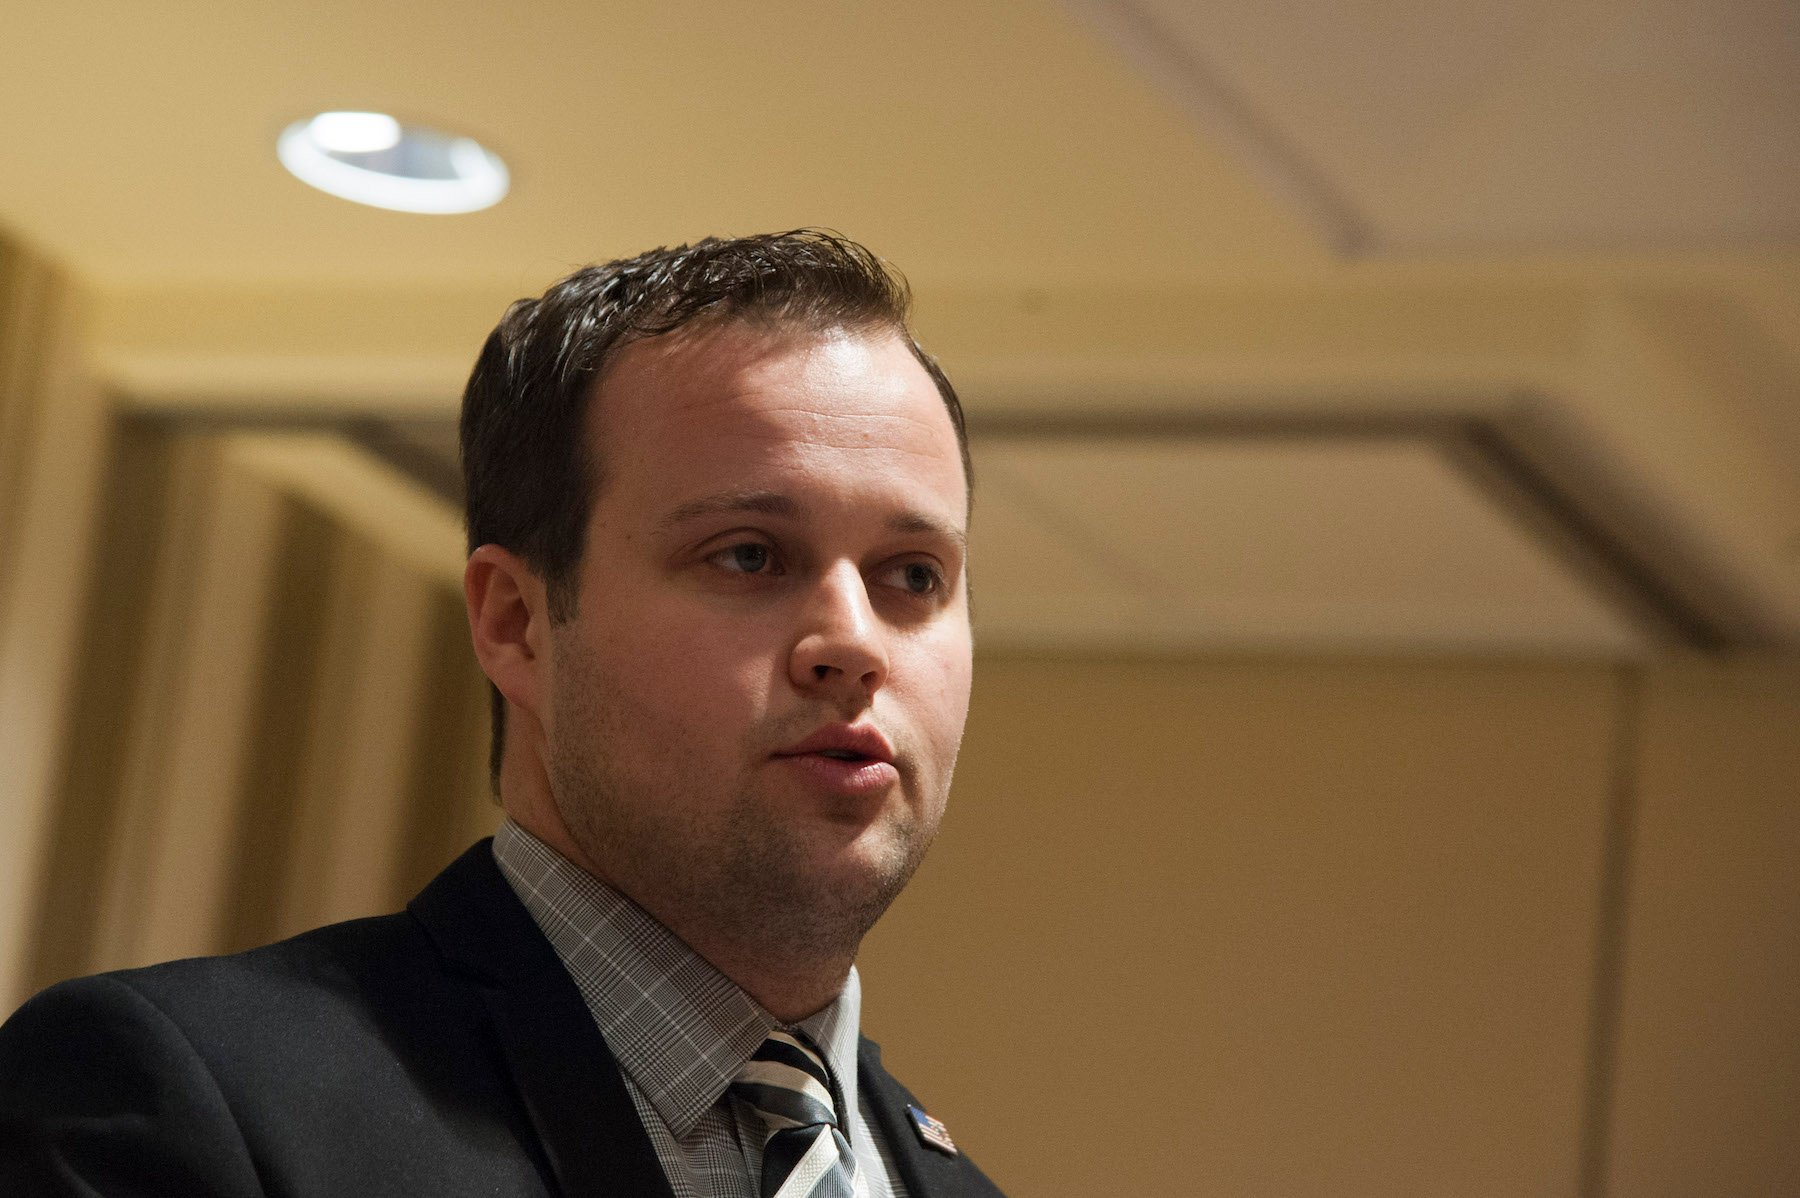 A close-up of Duggar family member Josh Duggar's face speaking at a conference